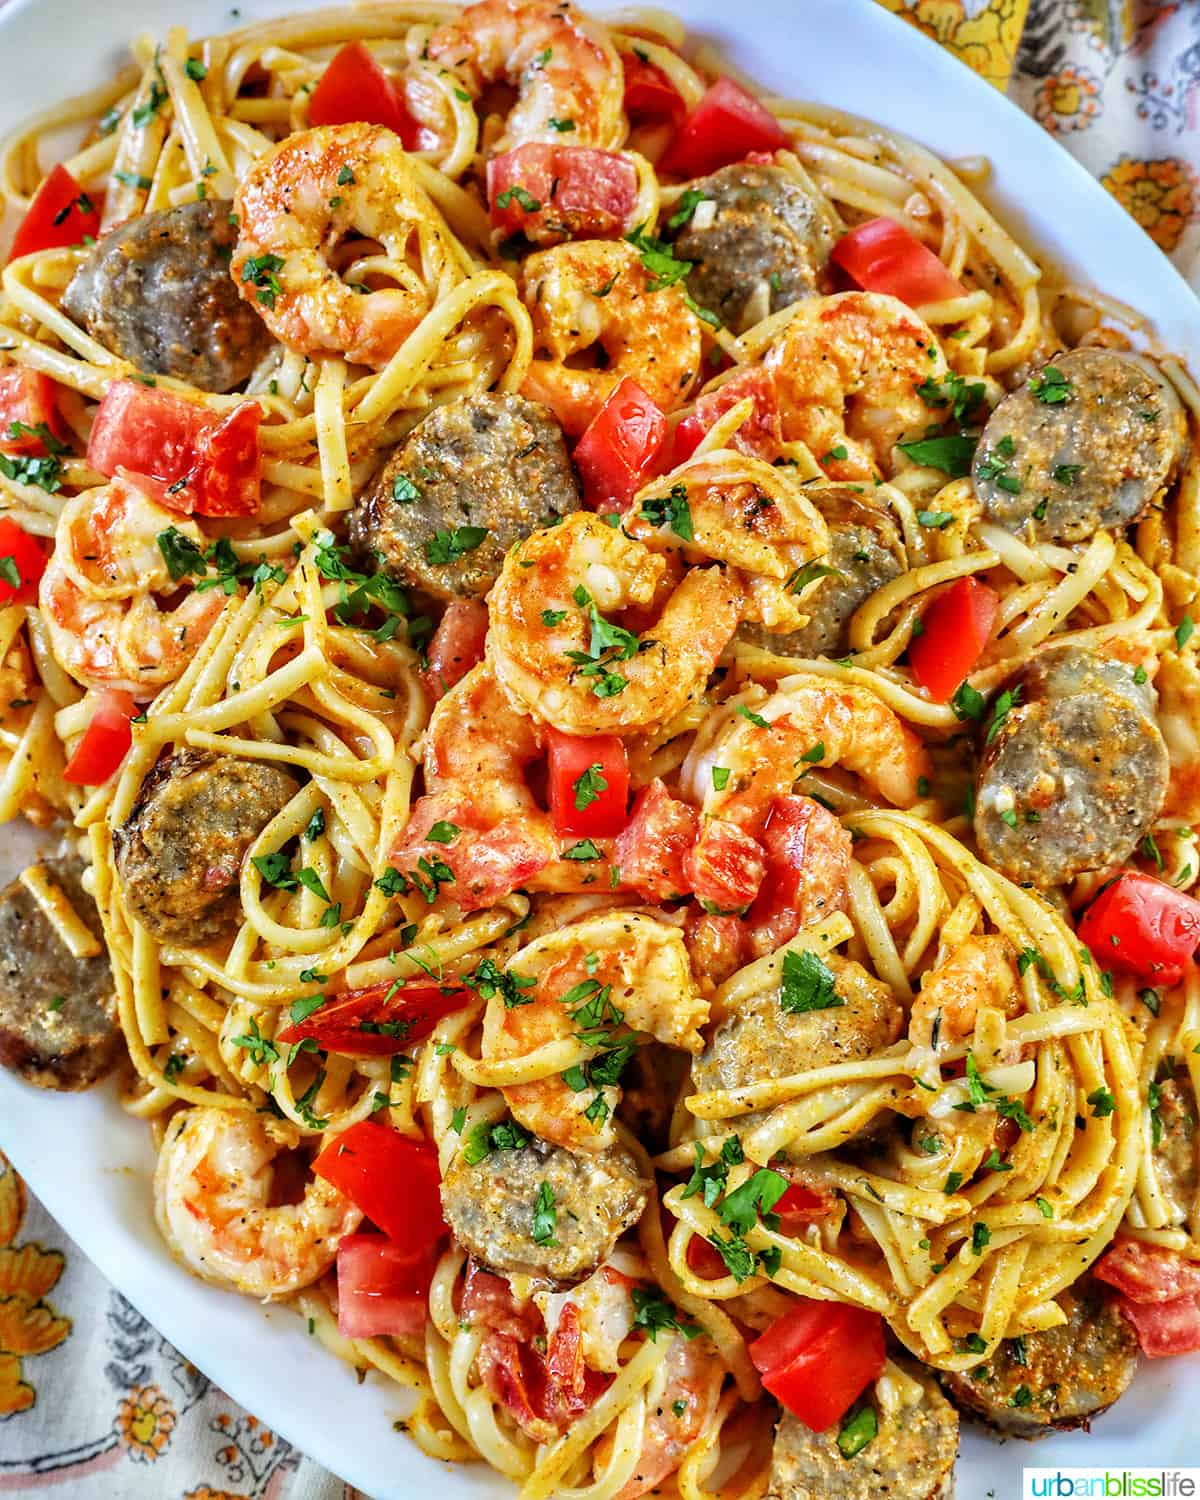 big platter of shrimp and sausage pasta with tomatoes and herbs.